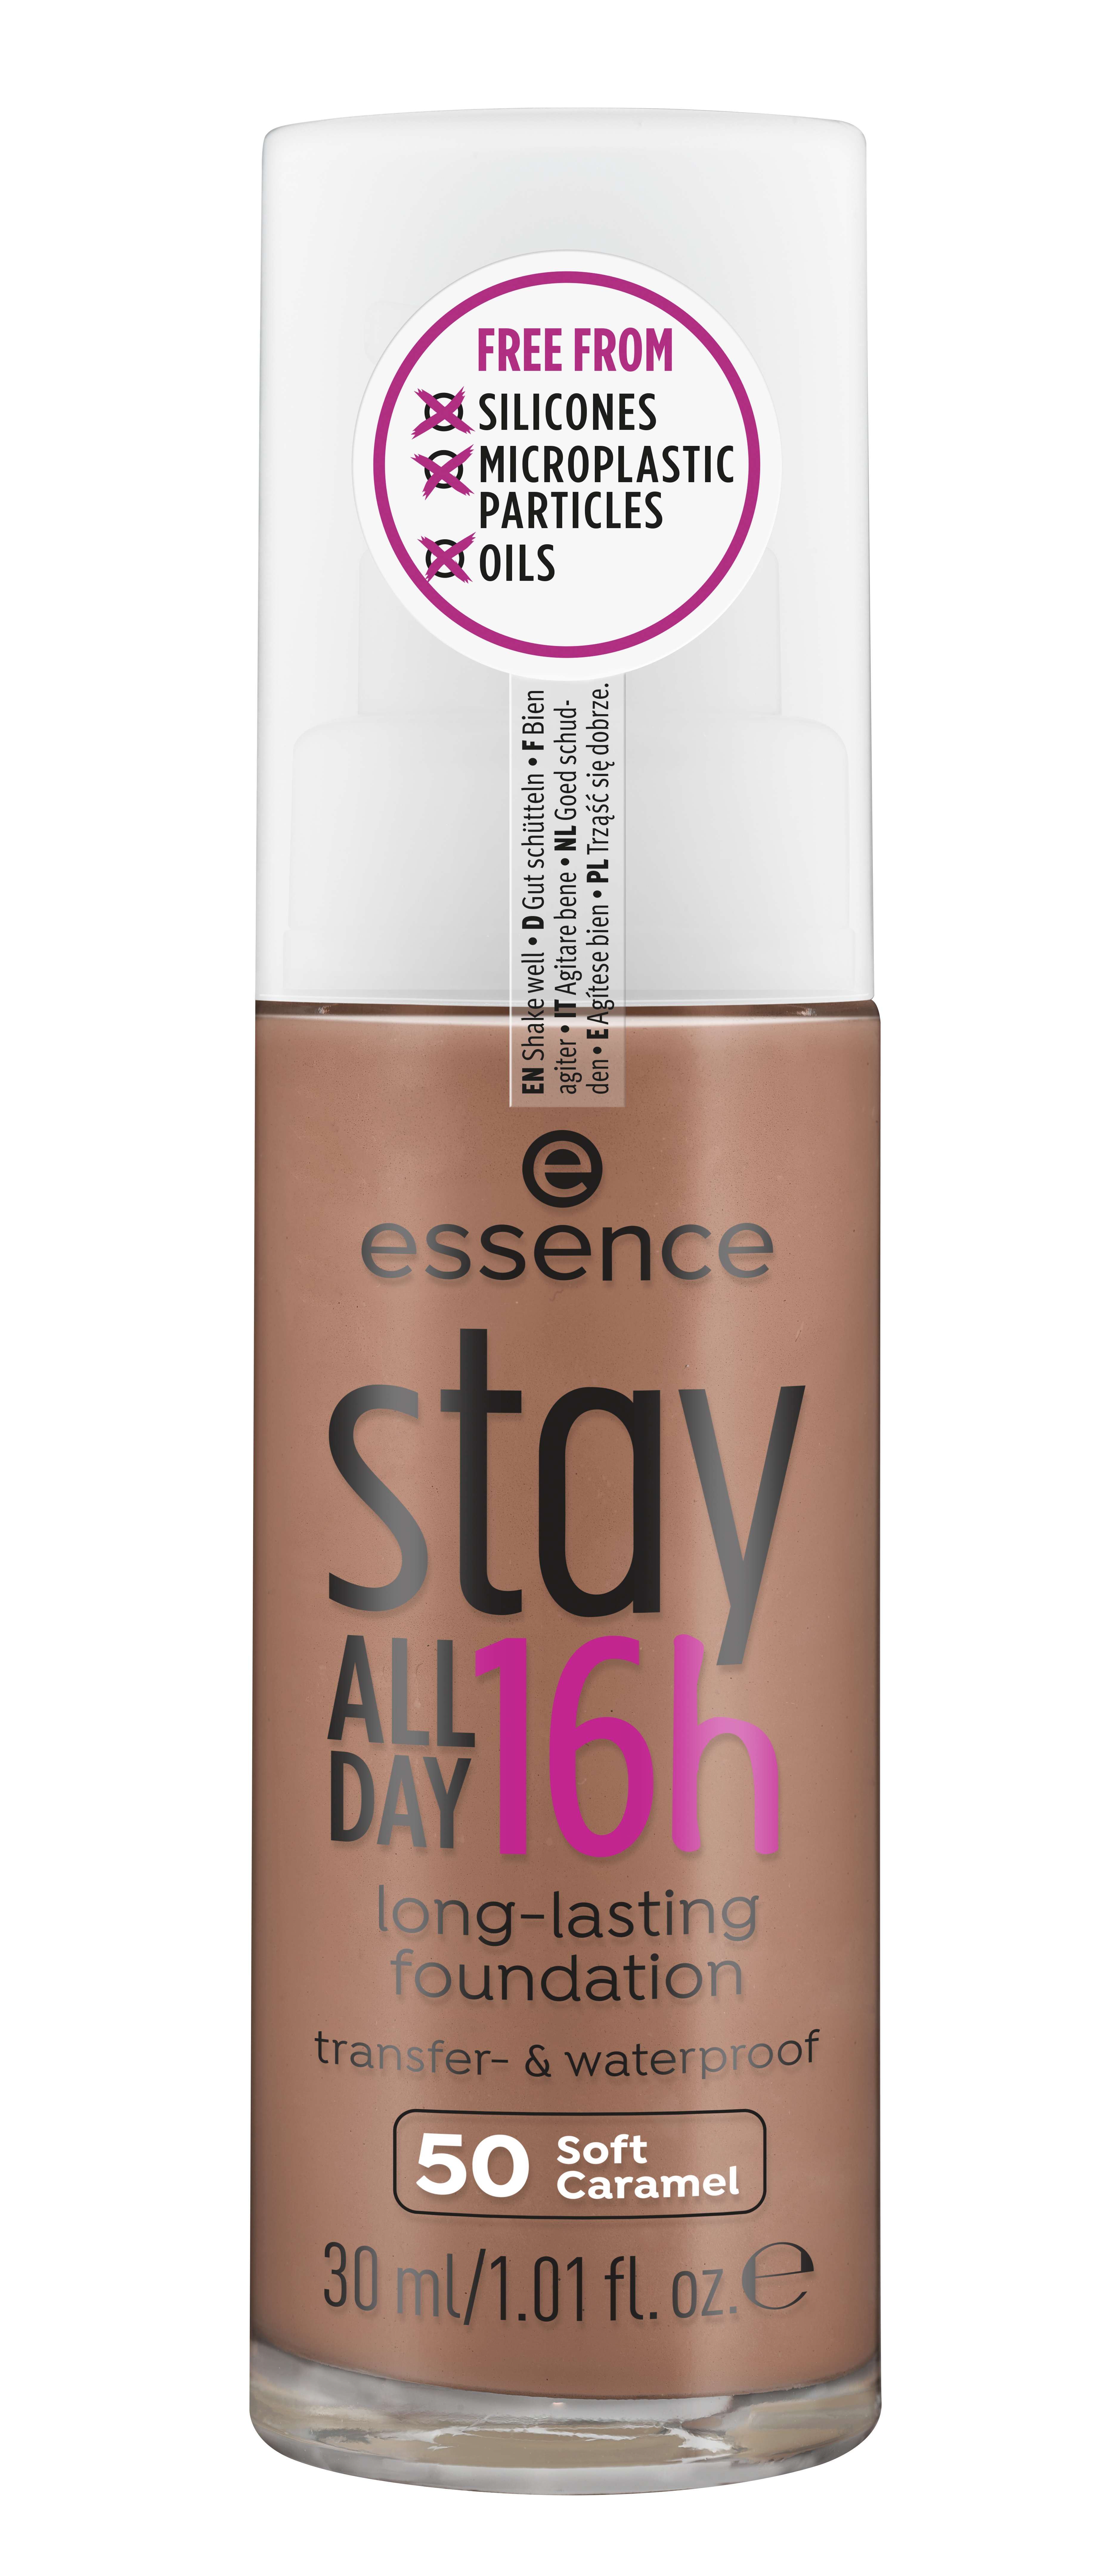 foundation day all stay 16h essence long-lasting Sand Soft 30